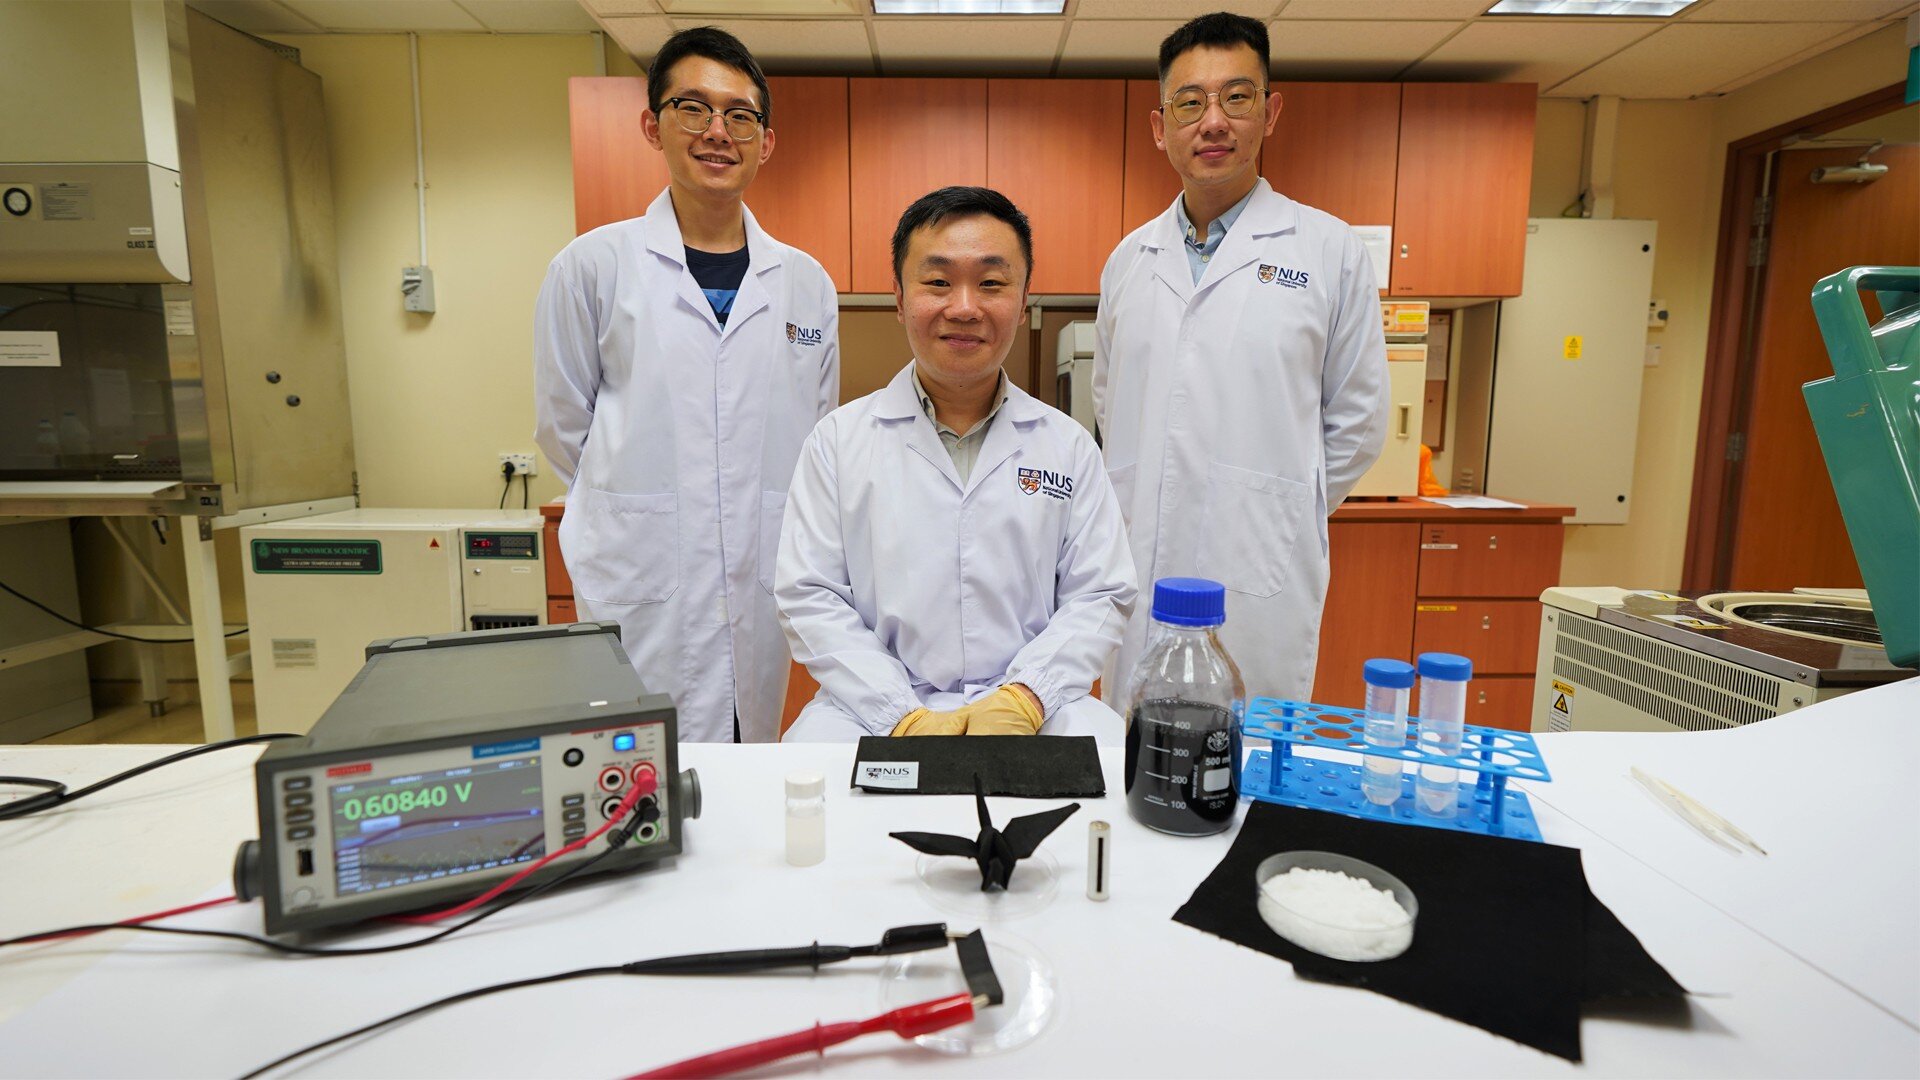 Self-charging, ultra-thin device that generates electricity from air moisture